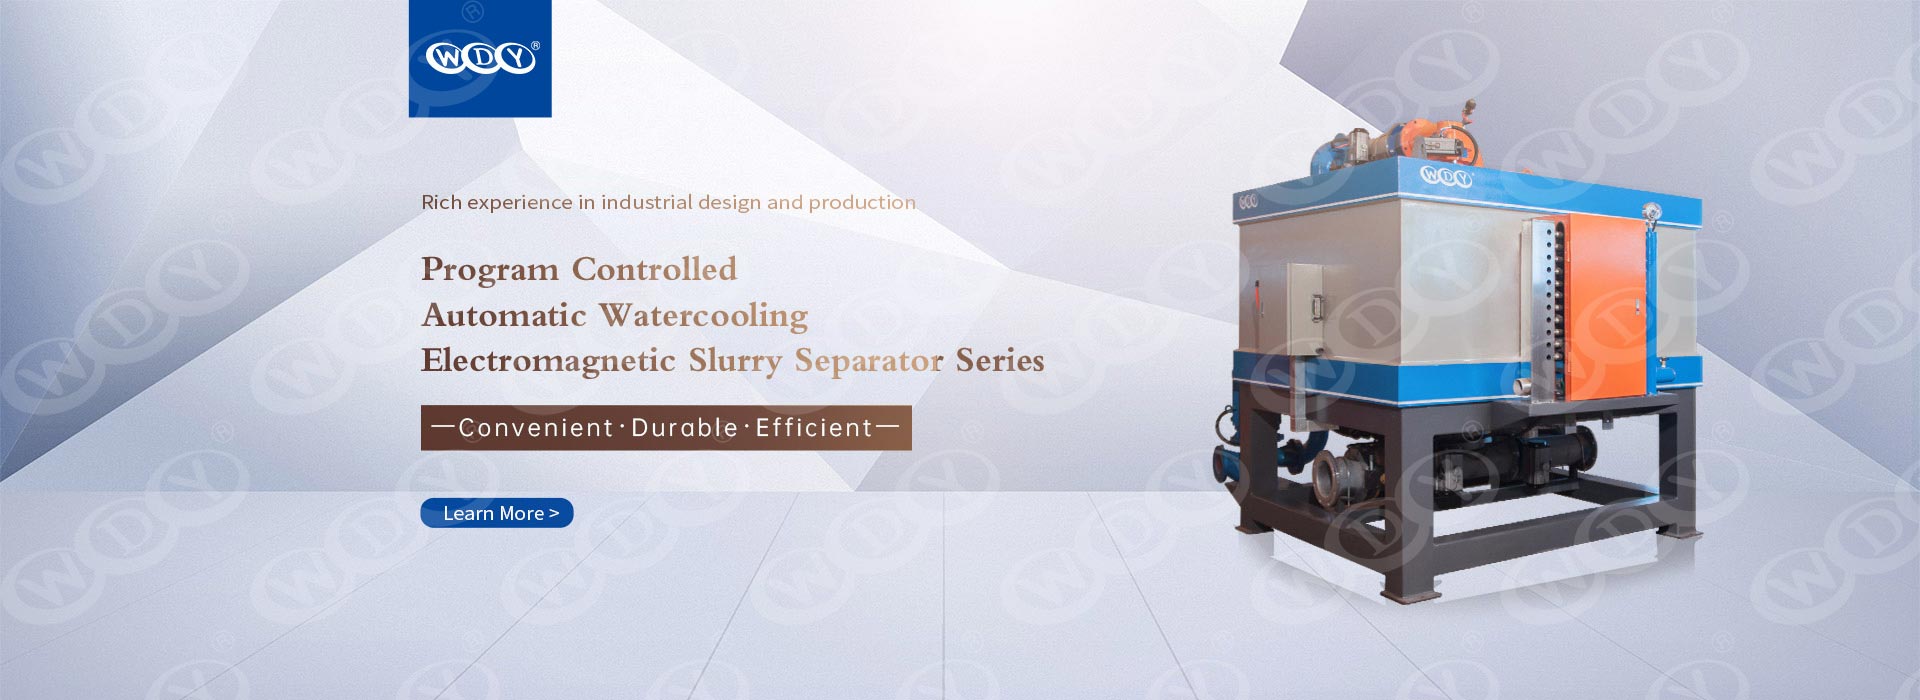 Program Controlled Automatic Water-cooling Electromagnetic Slurry Separator Series